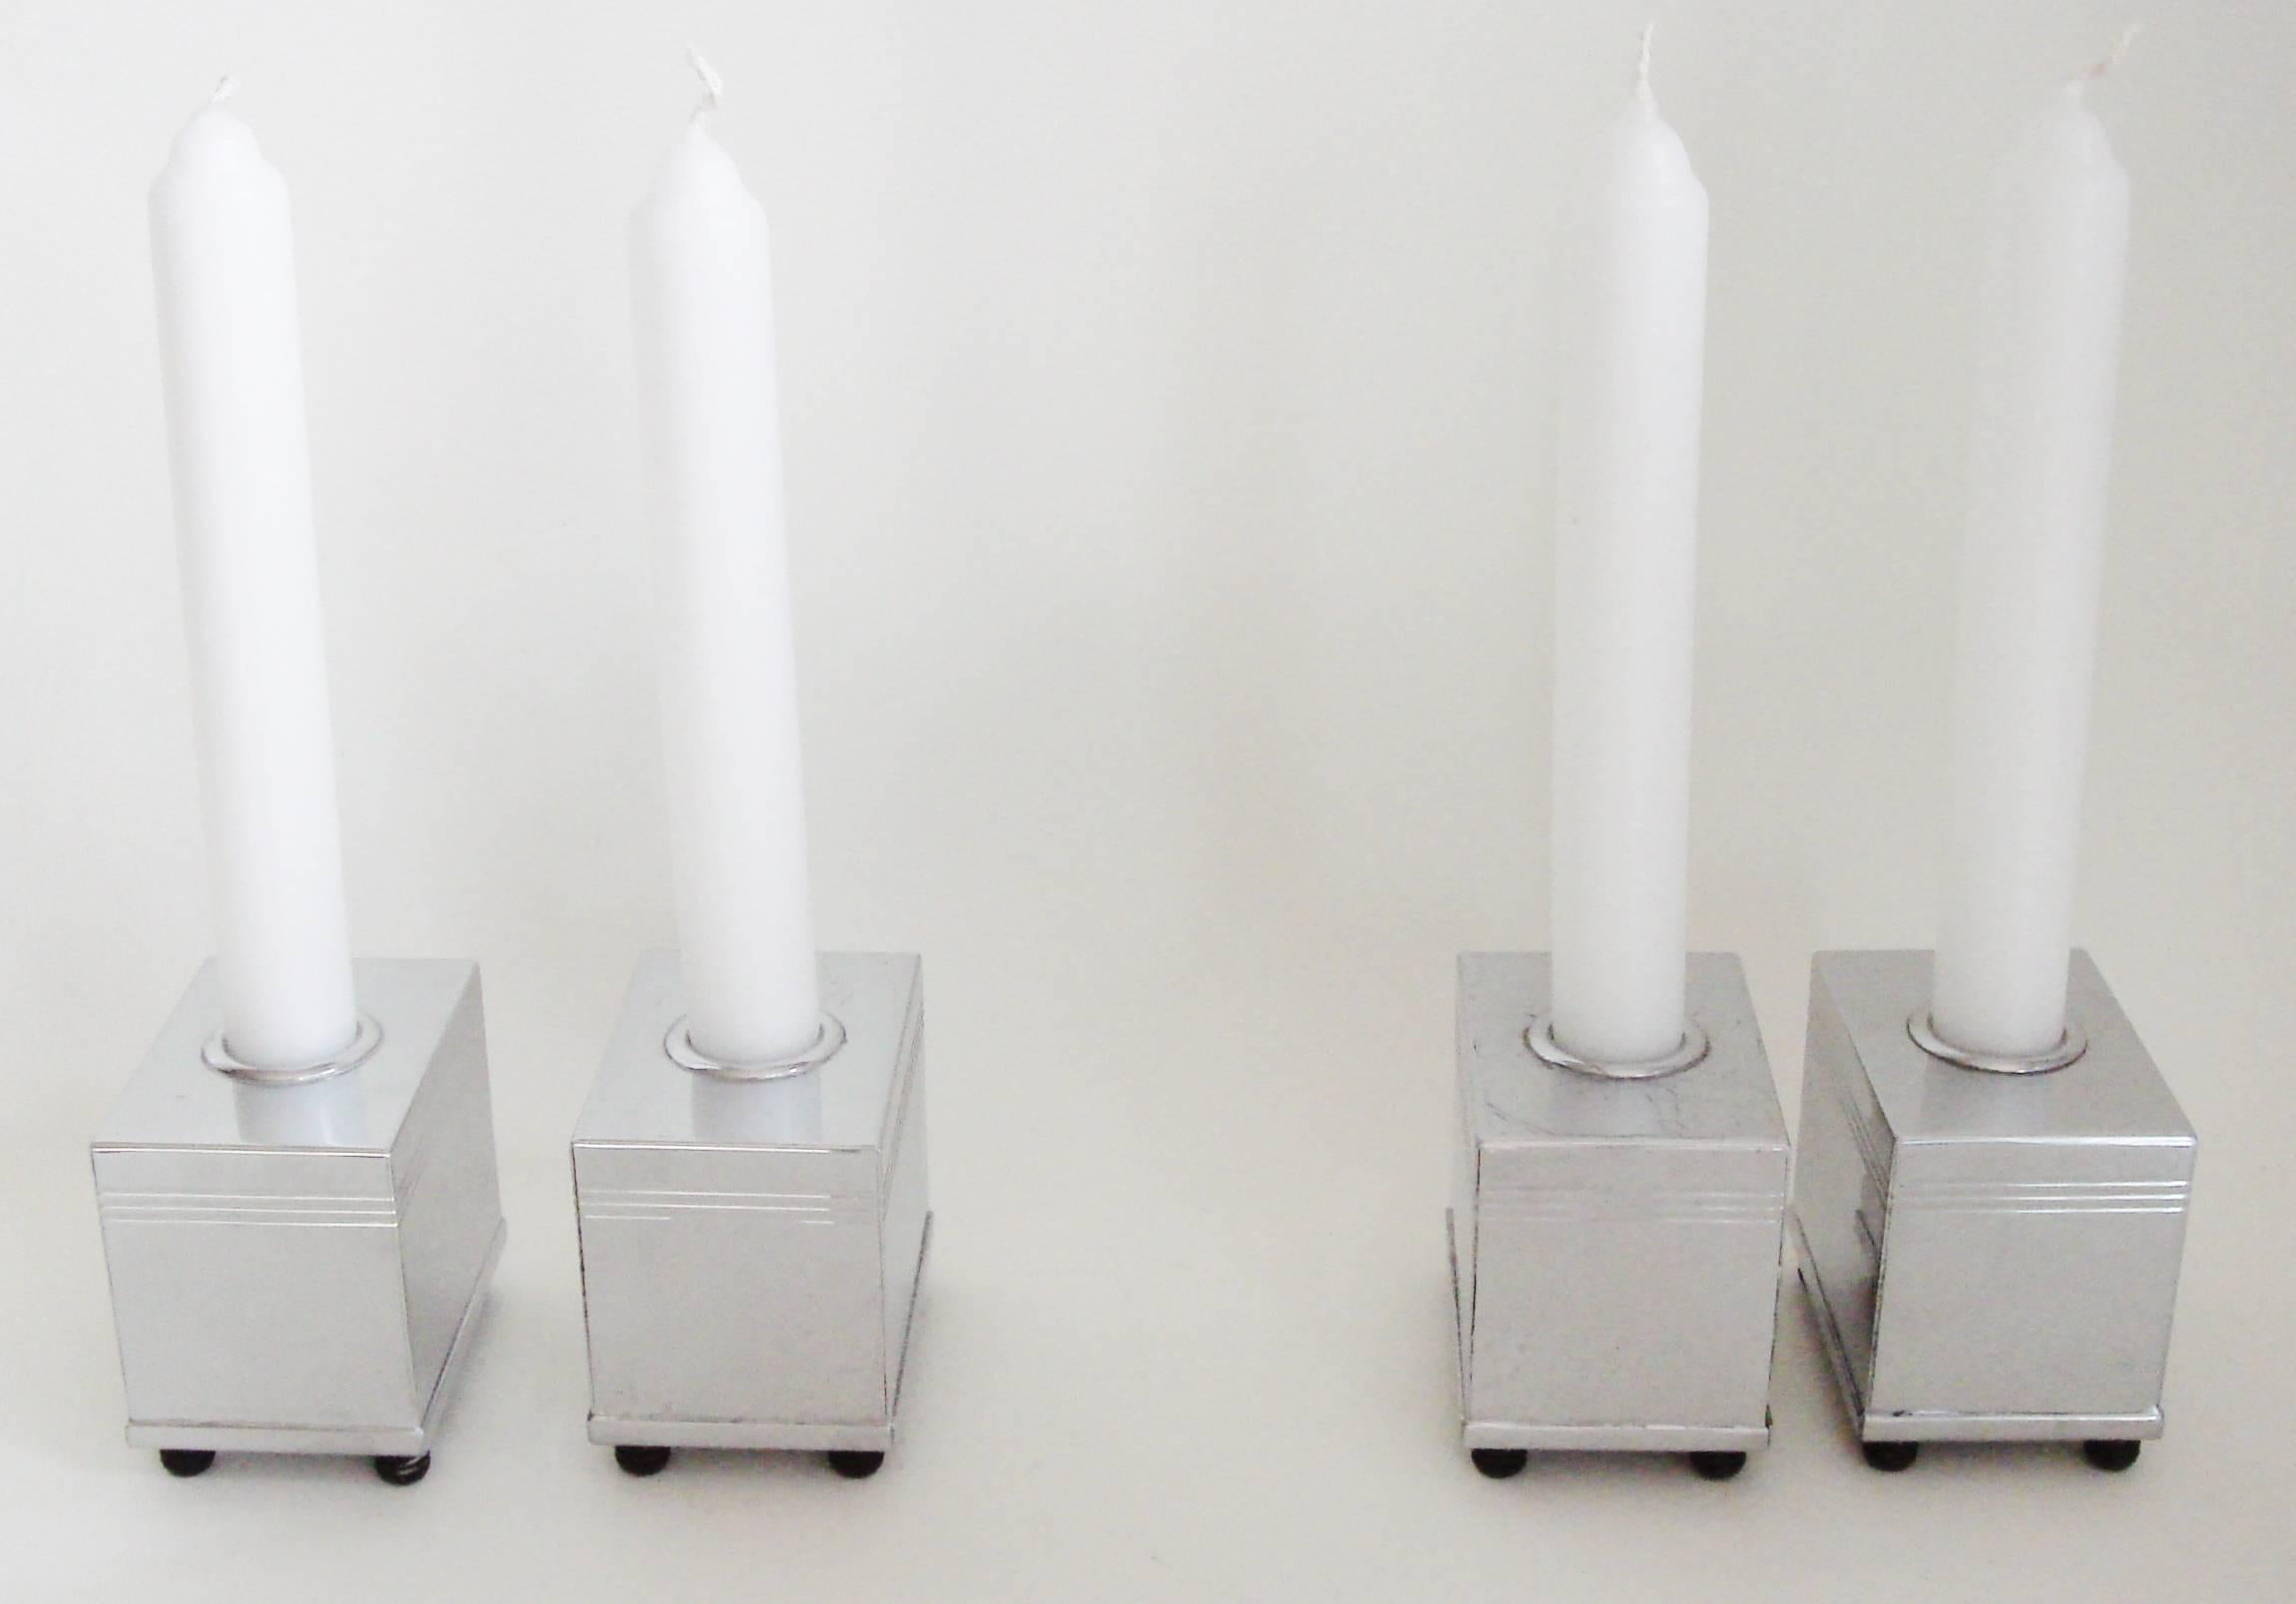 Four Rare American Art Deco Chrome Chase Architex Candlesticks by Lurelle Guild For Sale 3